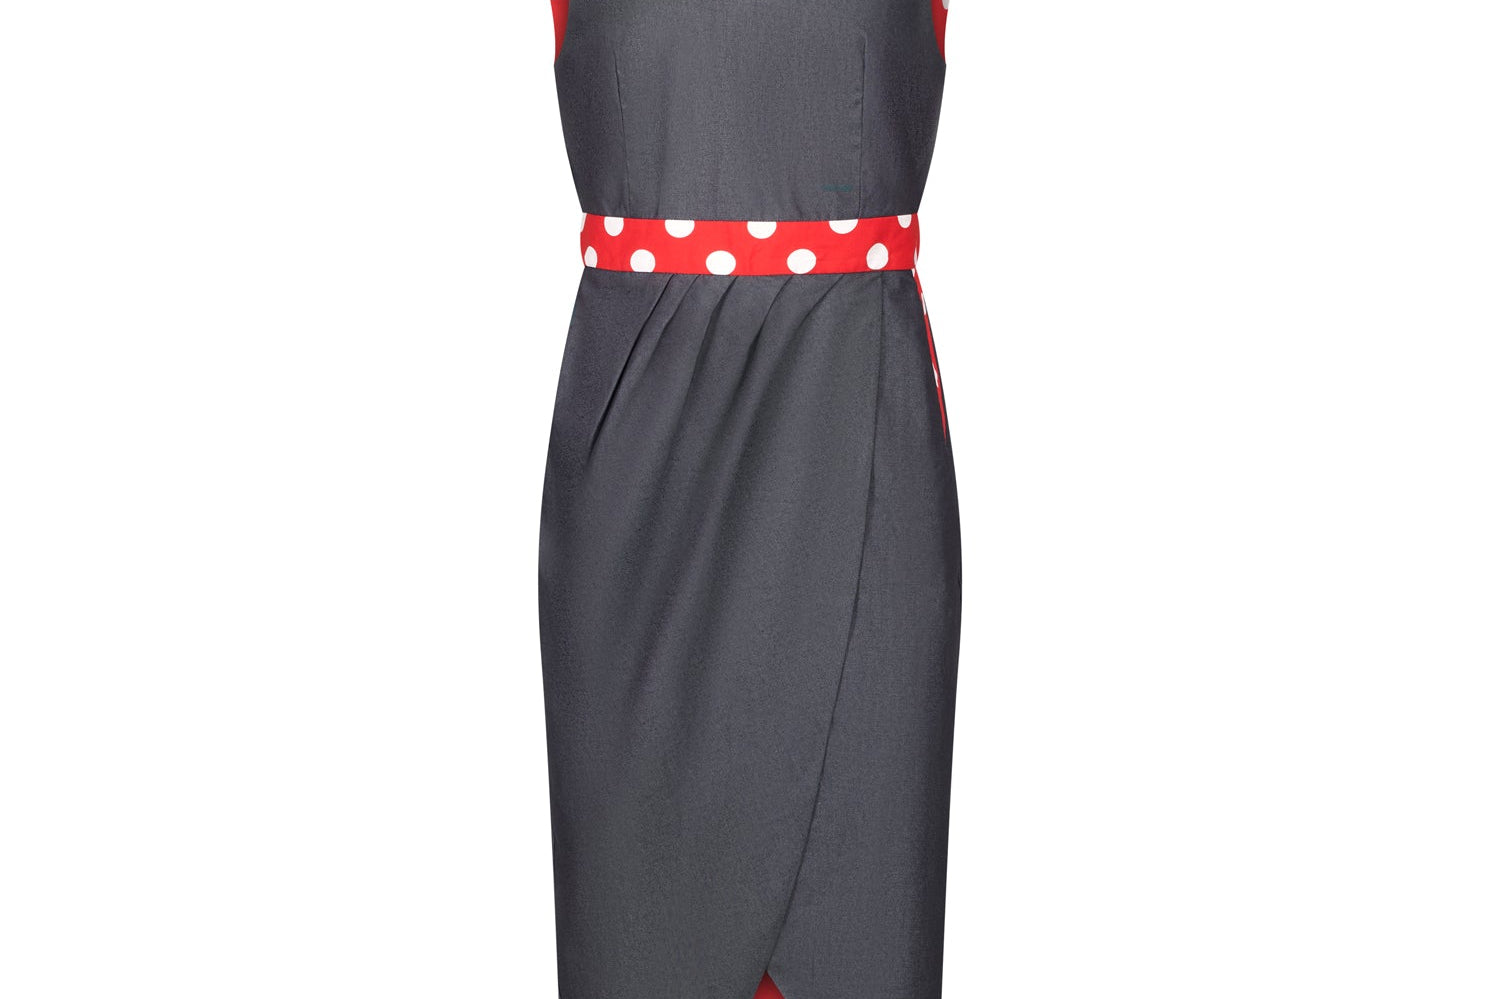 Denim Illusion wrap dress with Red and White Spot contrast fabric, front view